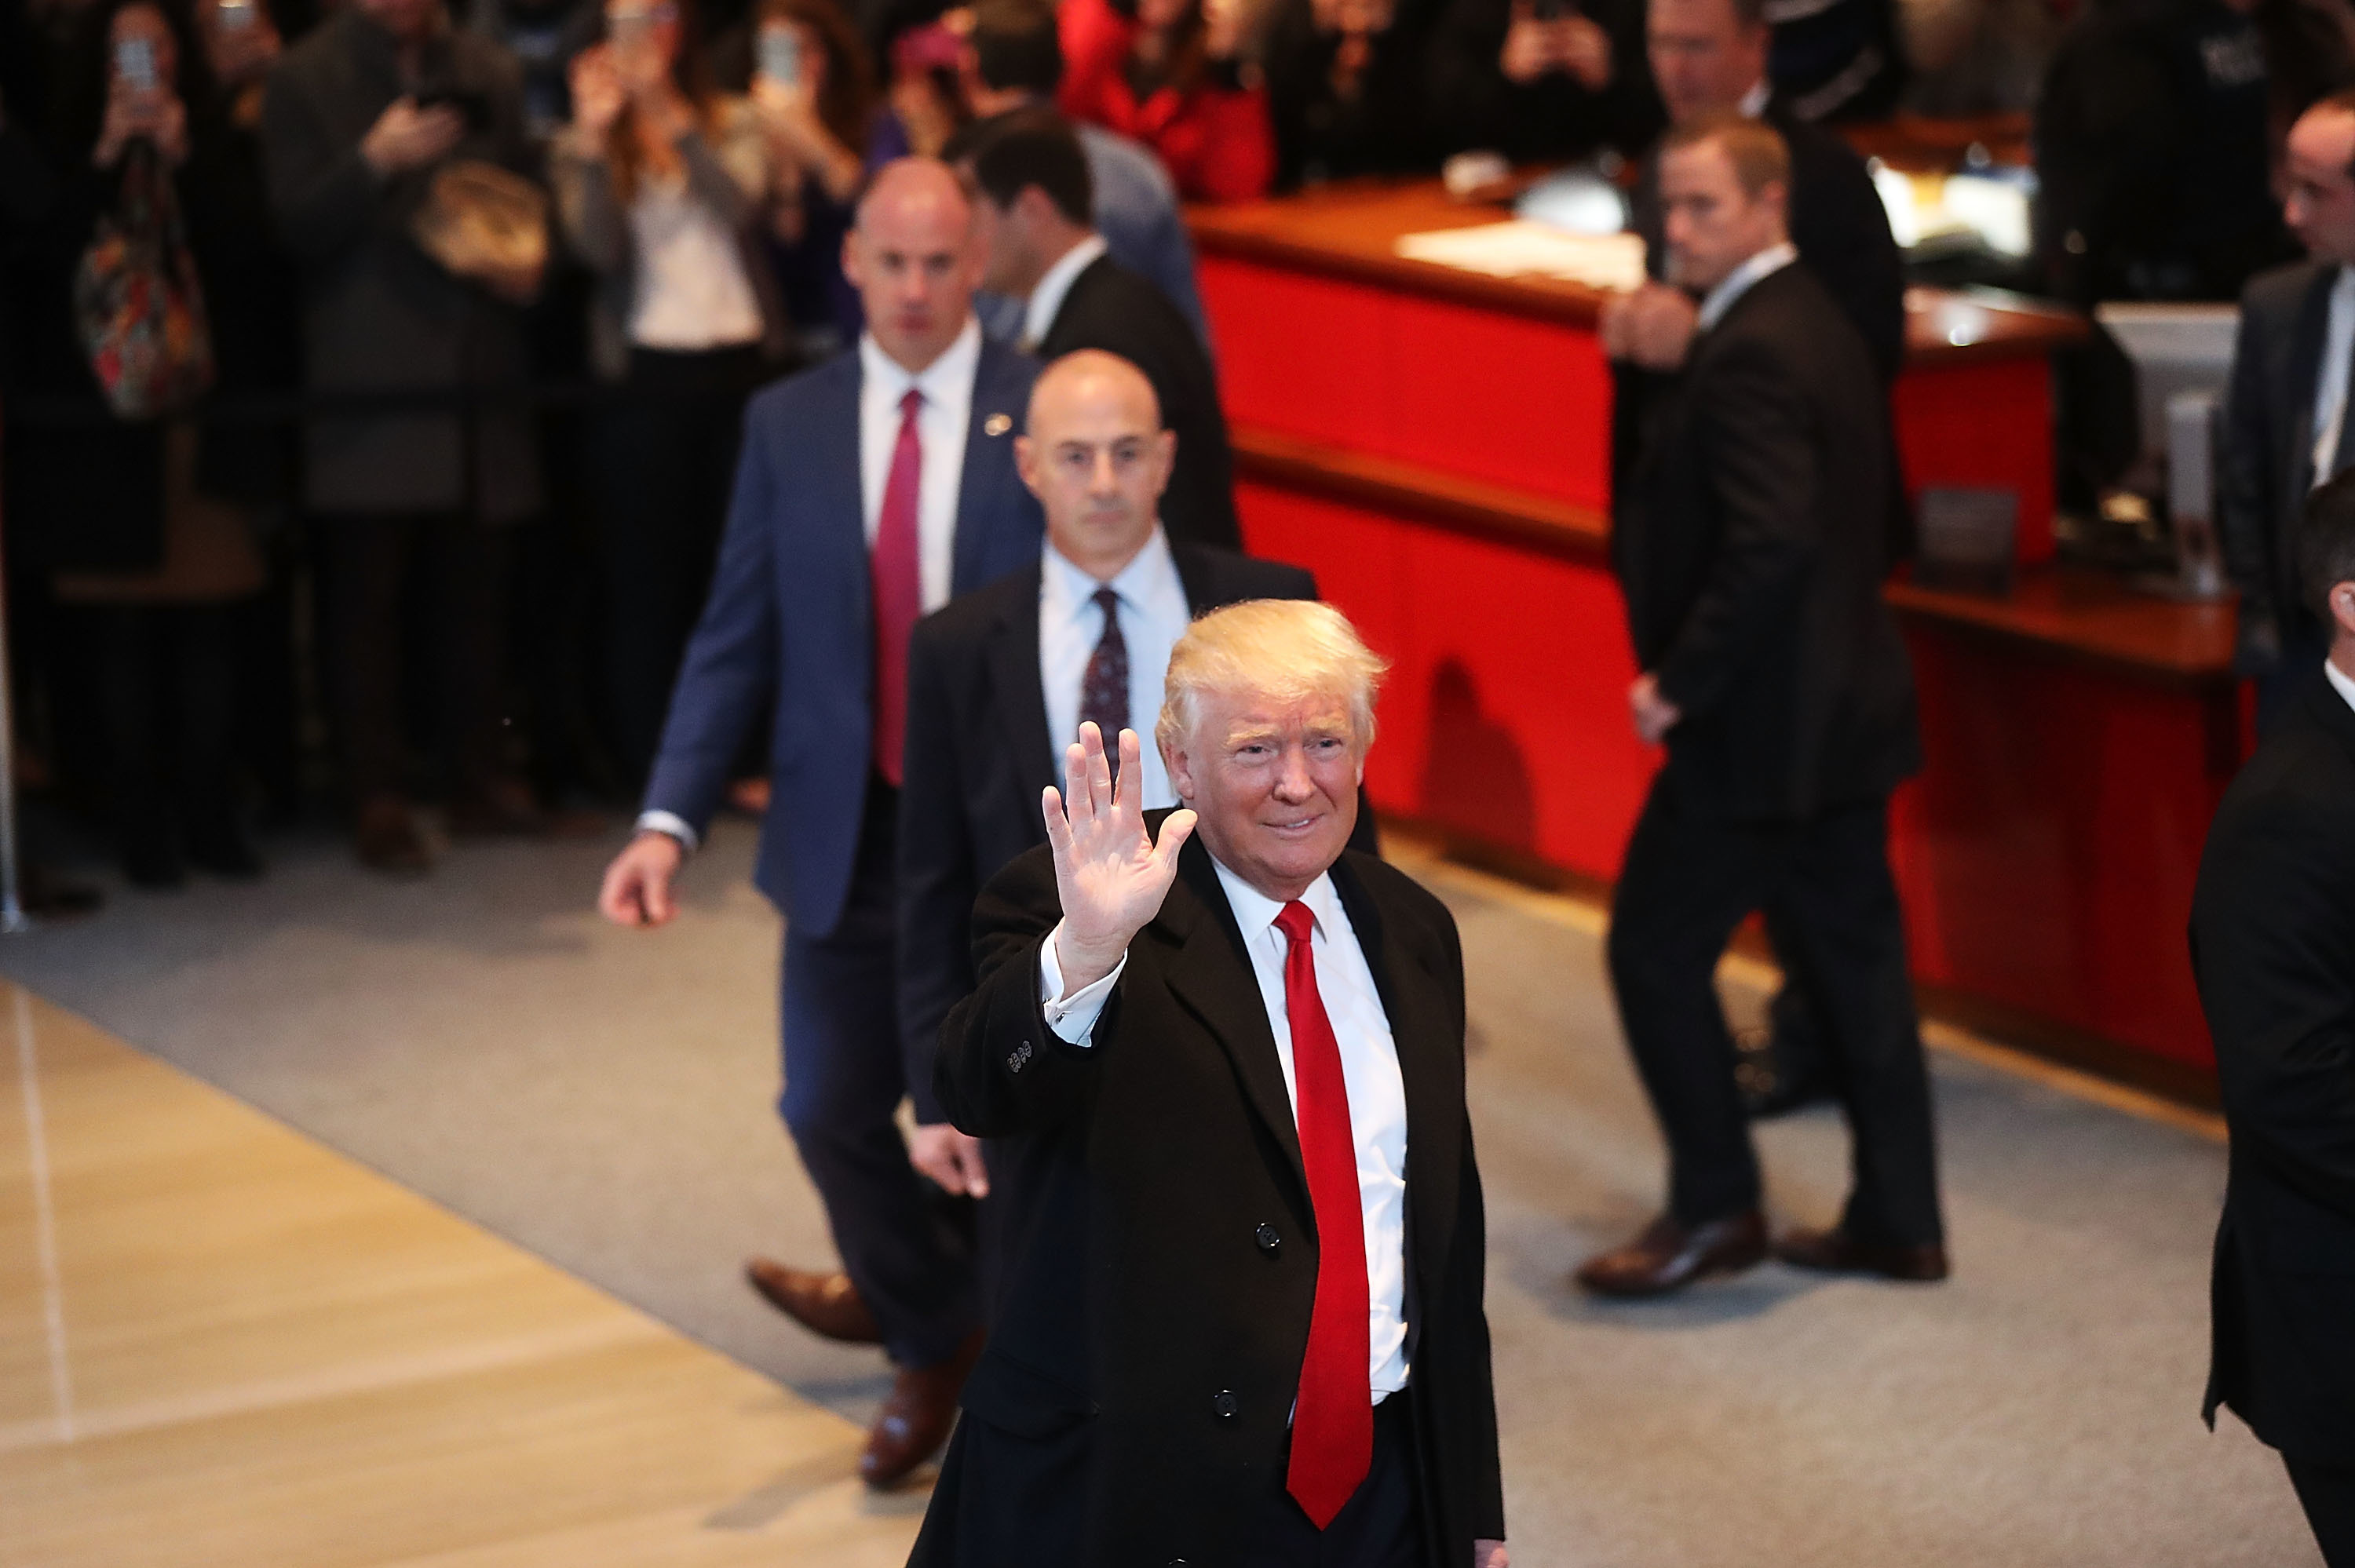 President-elect Donald Trump walks through the lobby of the New York Times following a meeting with editors at the paper on Tuesday in New York City